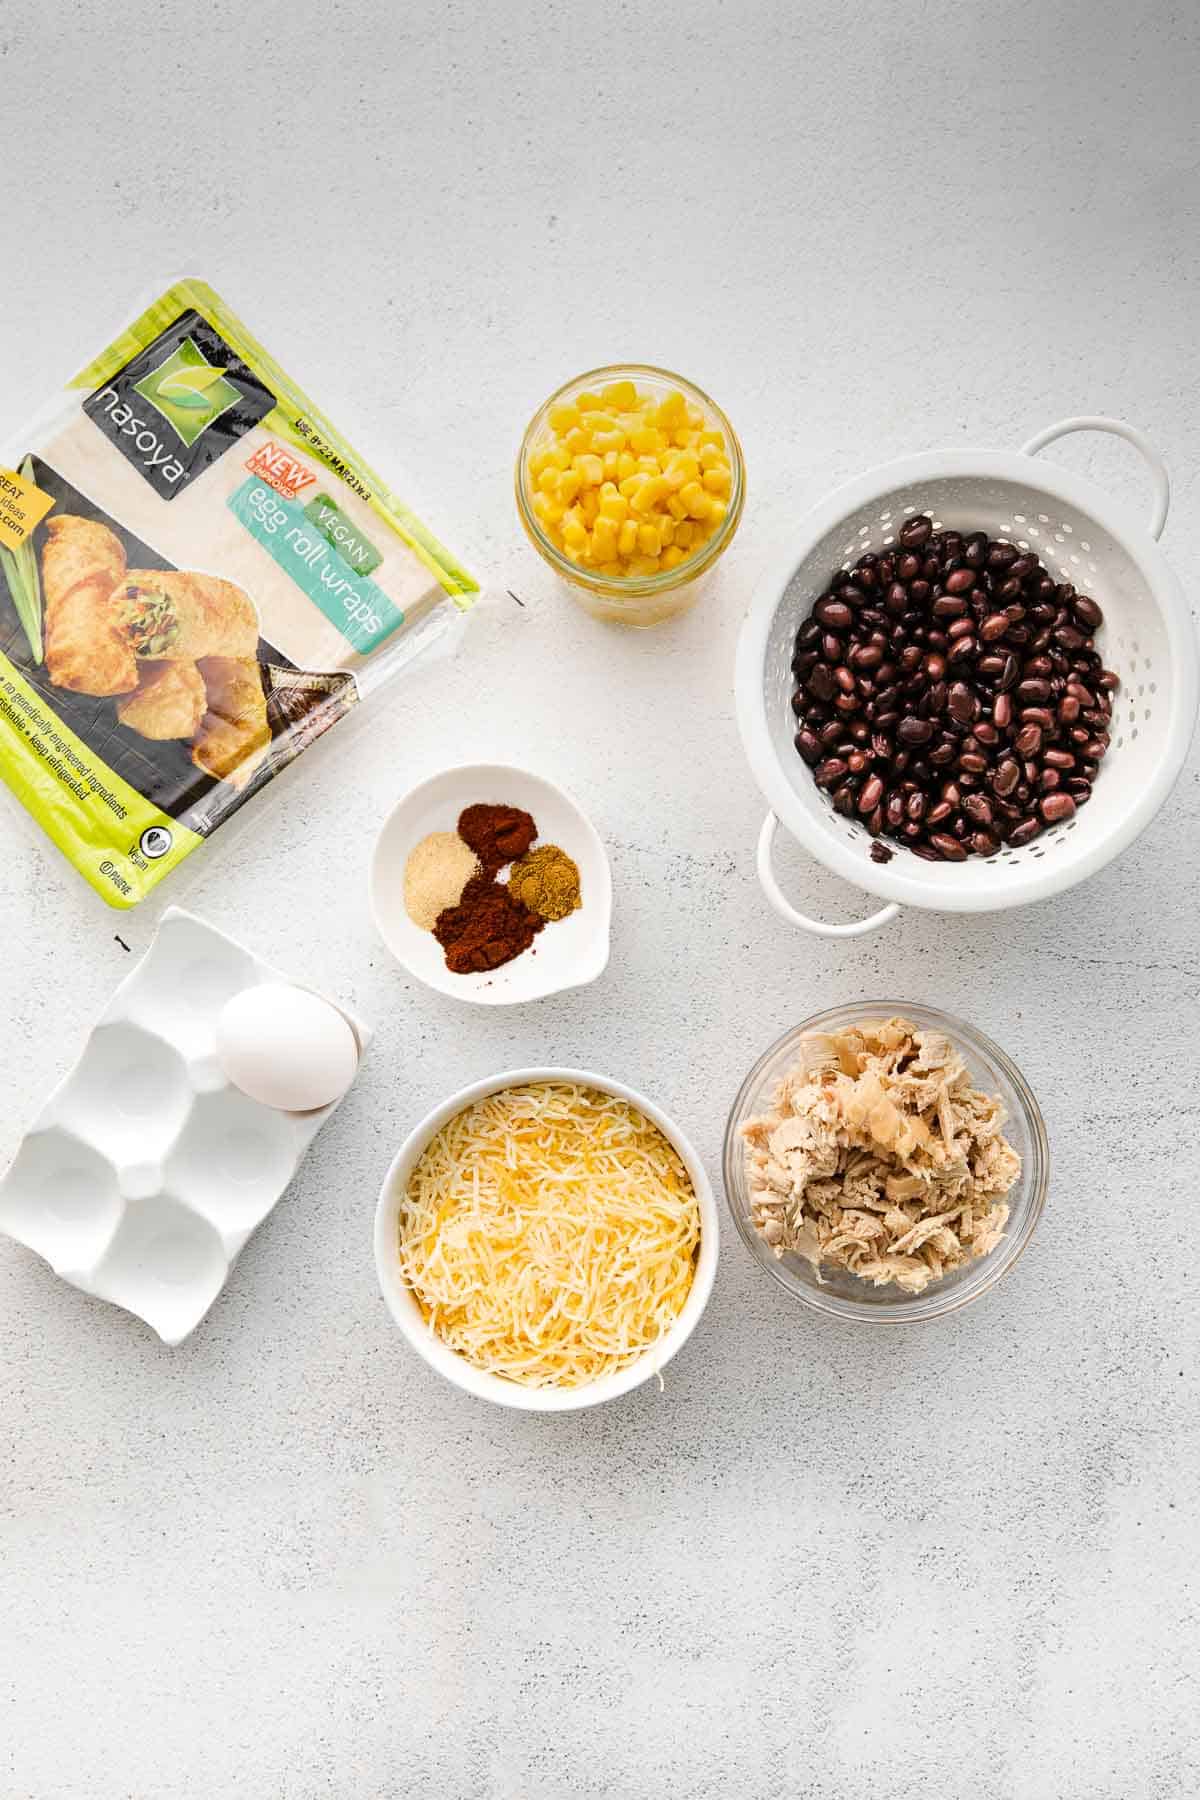 Several small bowls with ingredients for Air Fryer Southwestern Egg Rolls - chicken, black beans, corn, shredded cheese, egg, egg roll wrappers and seasonings.